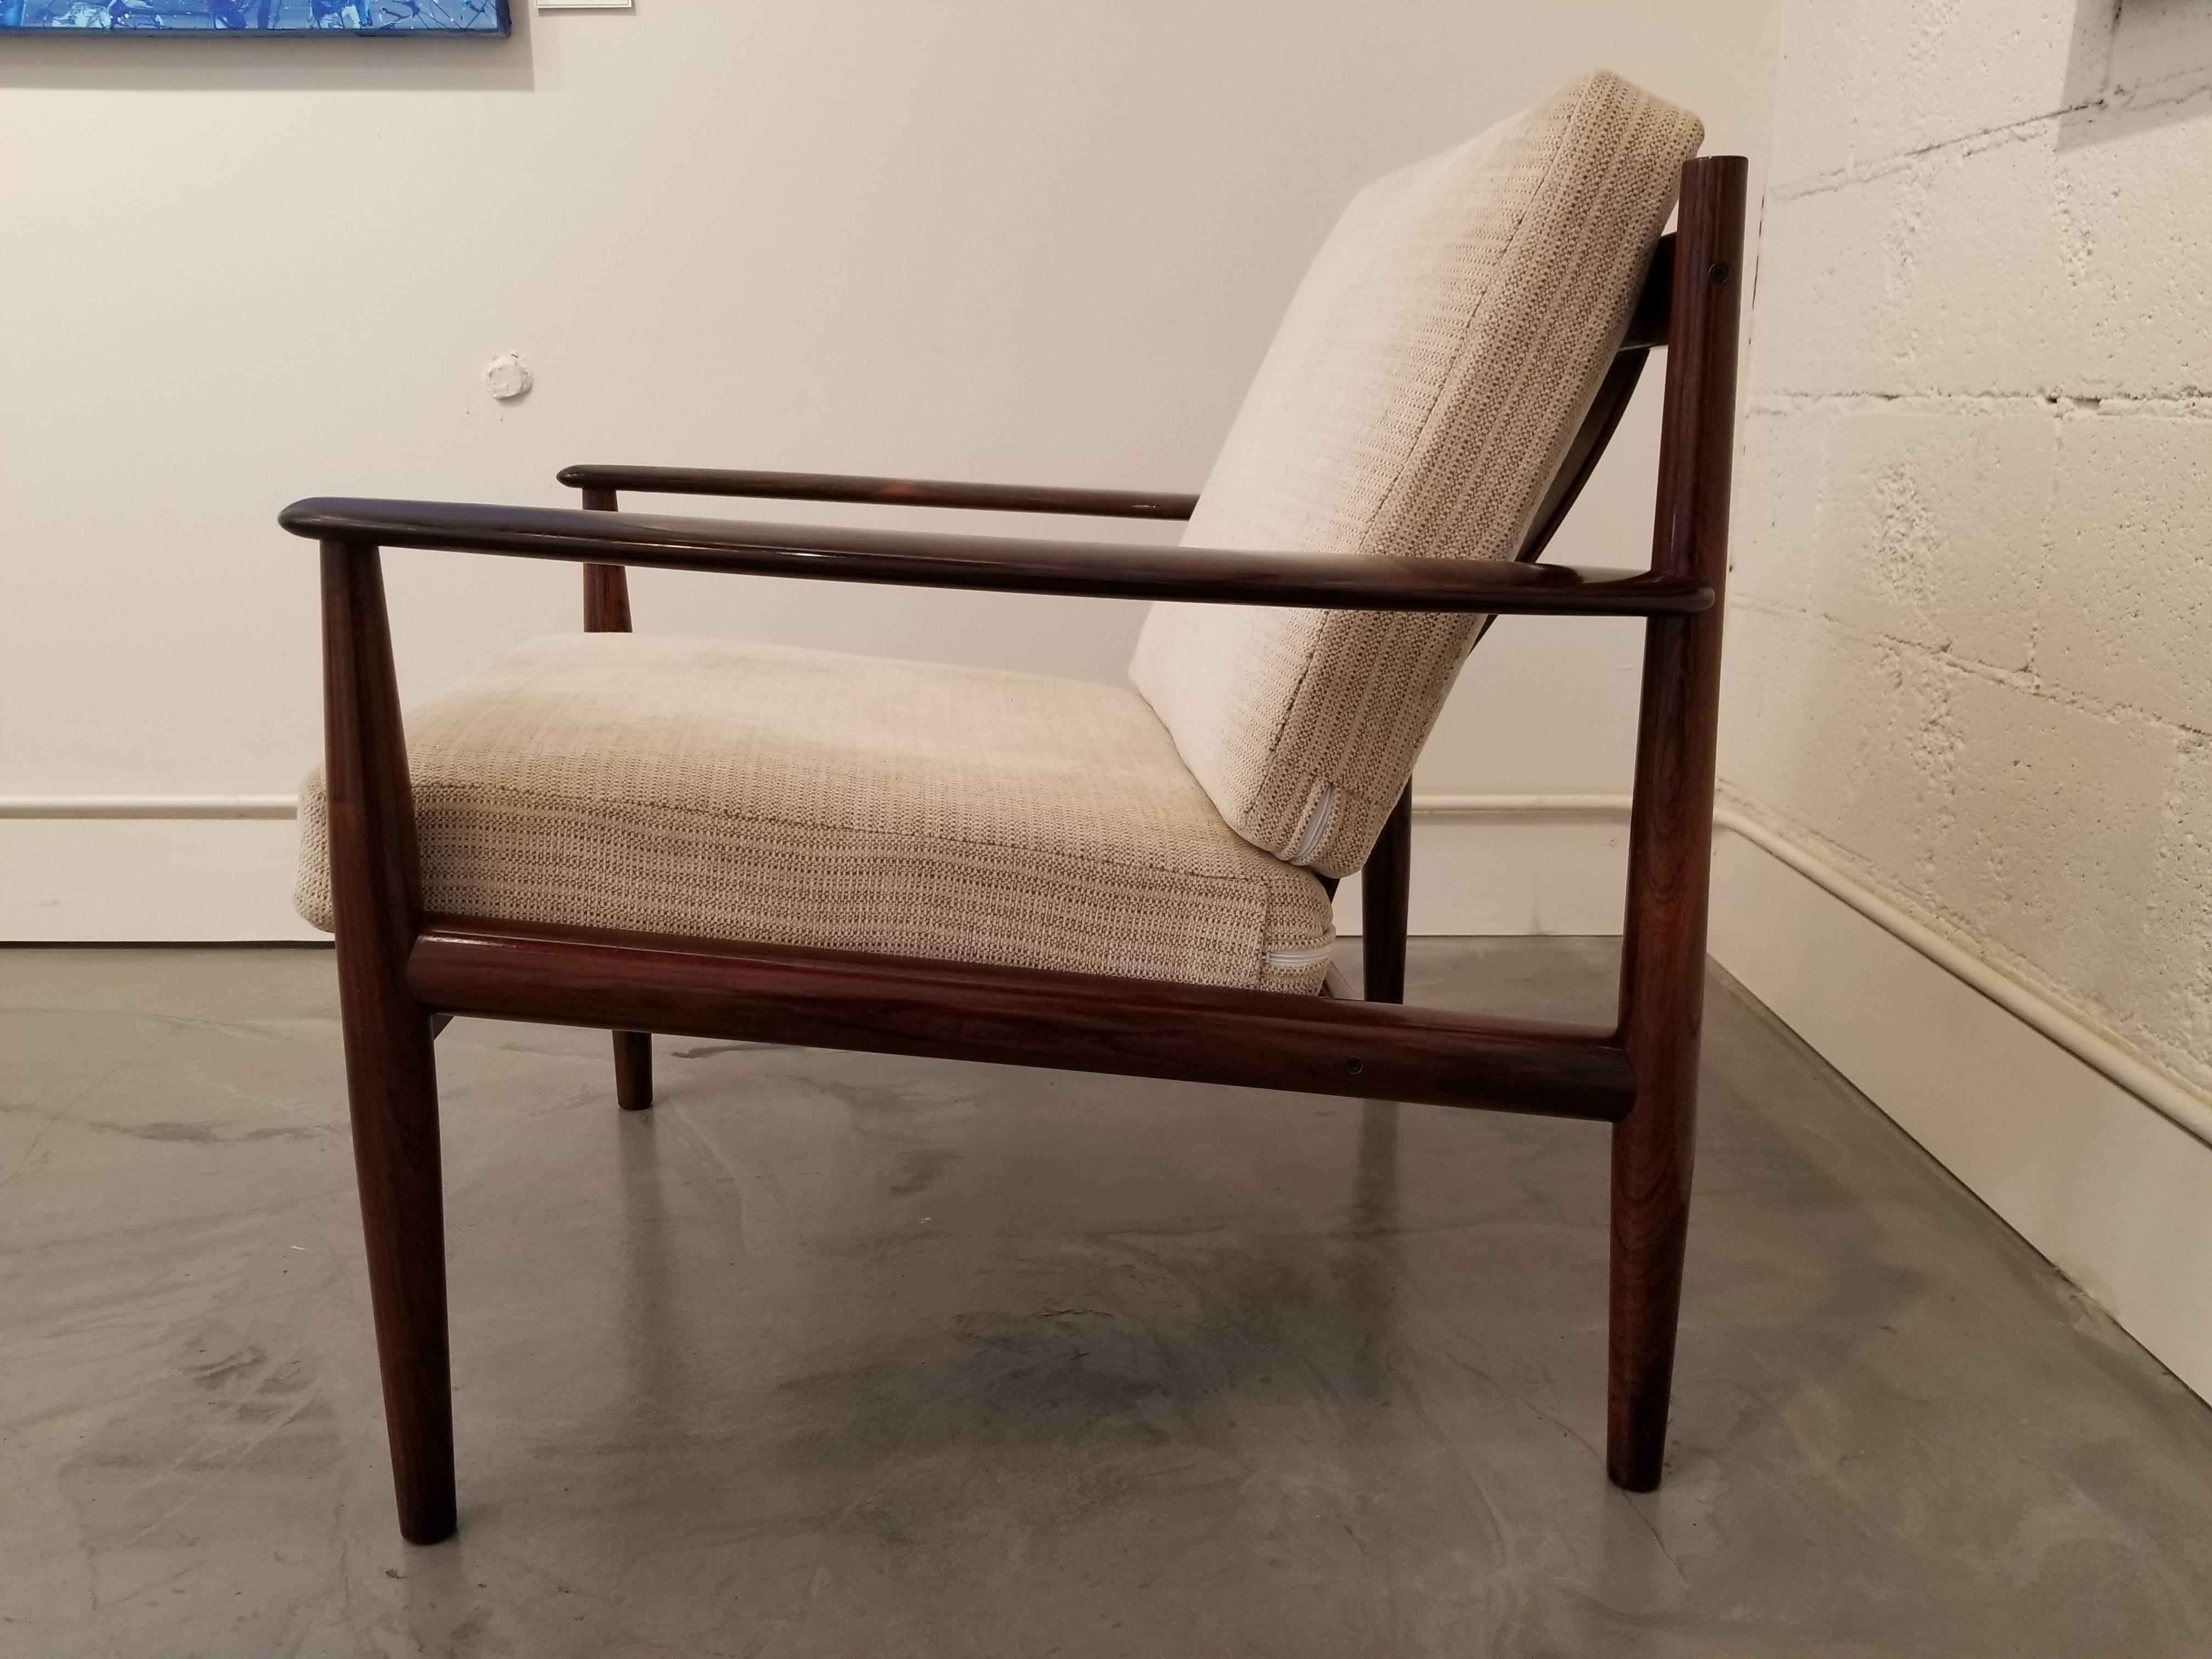 Exceptional Danish modern lounge chair by Grete Jalk for France & Son, circa 1960s. Notice figured detail to wood grain. Signed.